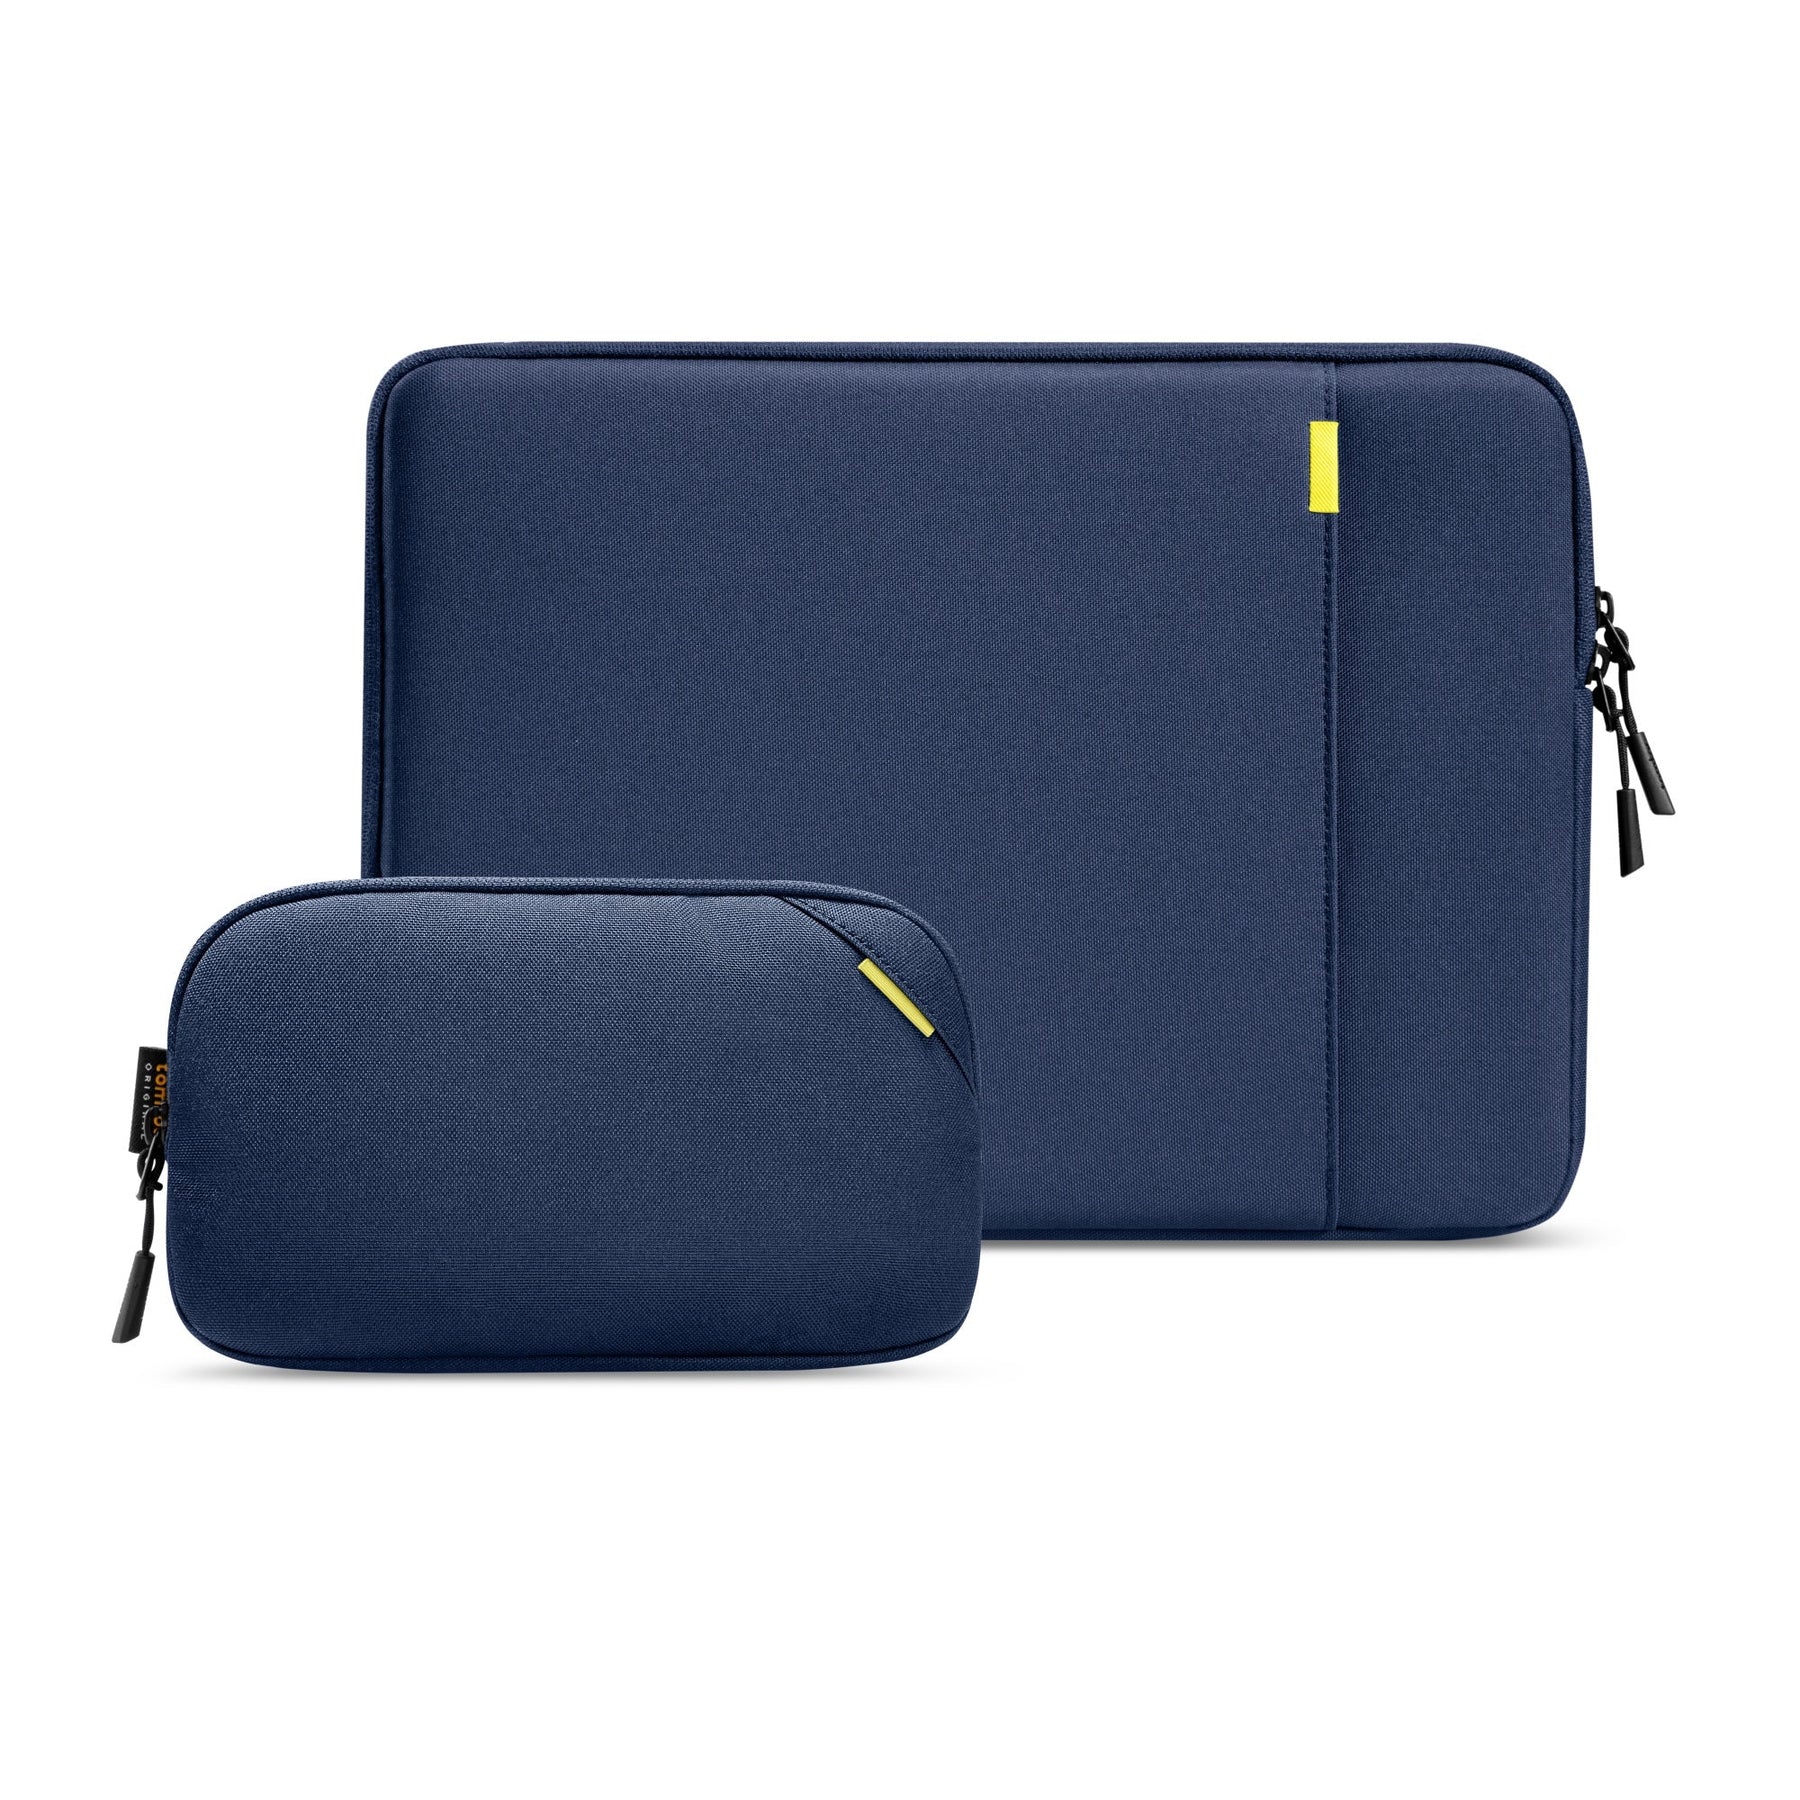 Defender-A13 Laptop Sleeve Kit For 16-inch New MacBook Pro | Navy Blue